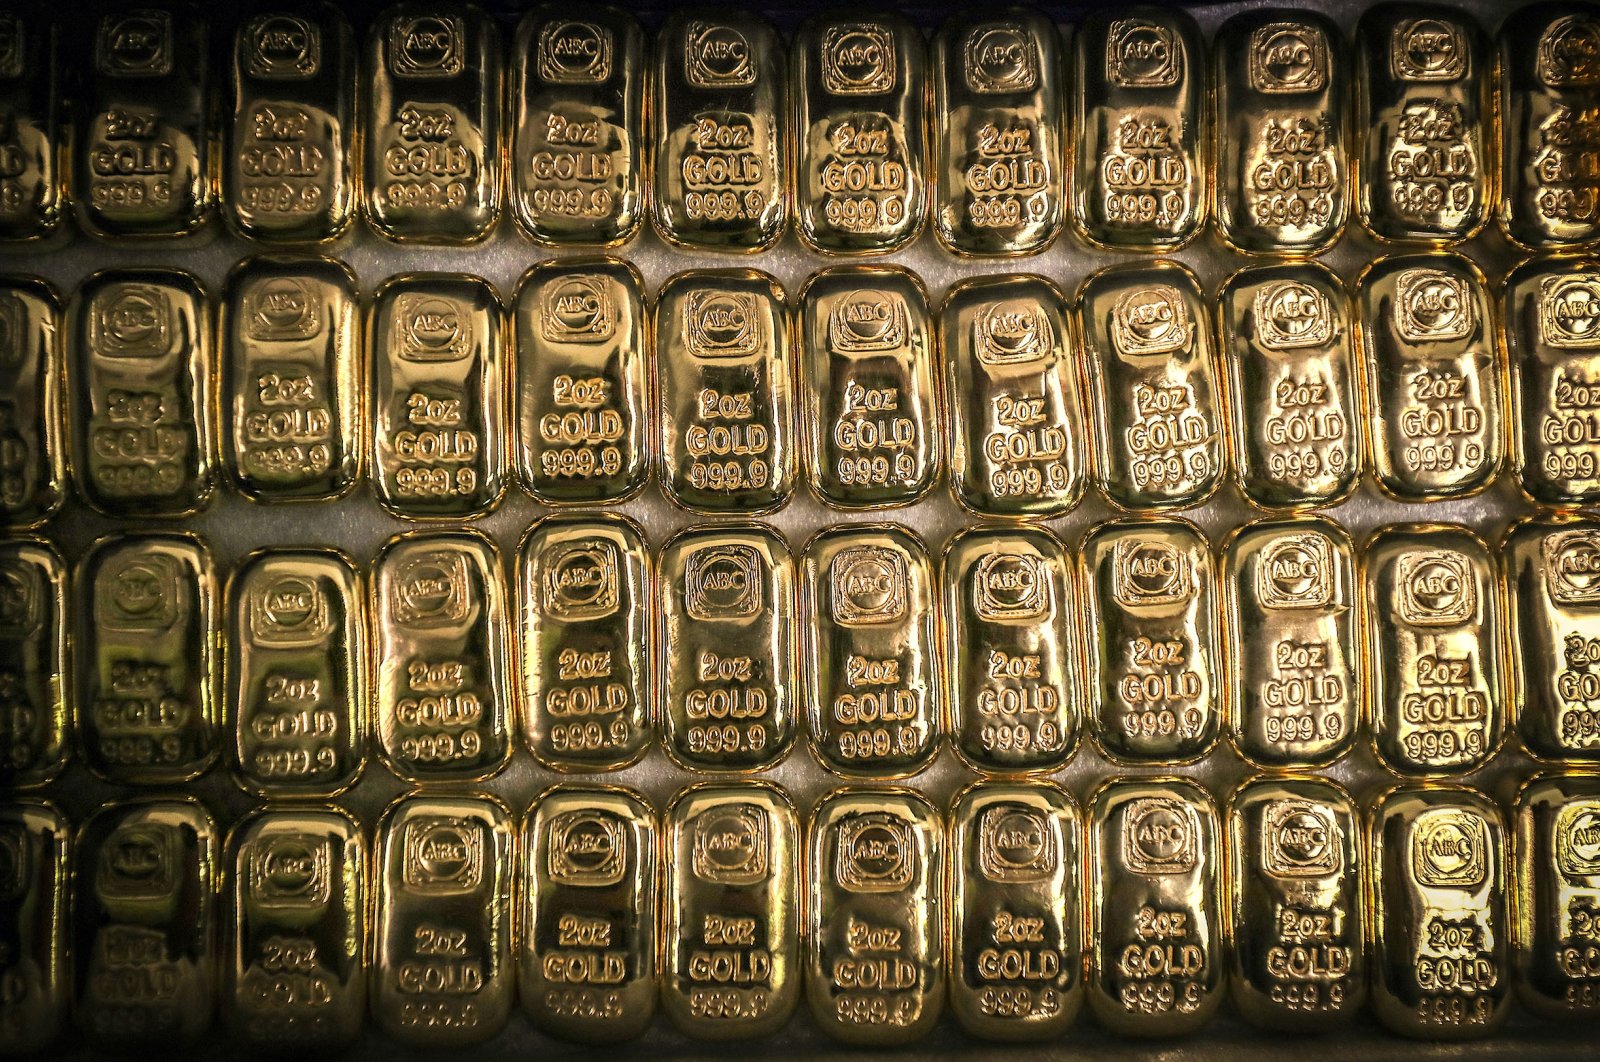 Ounce gold bars are displayed at the ABC Refinery smelter in Sydney, New South Wales, Australia, July 2, 2020. (Getty Images)